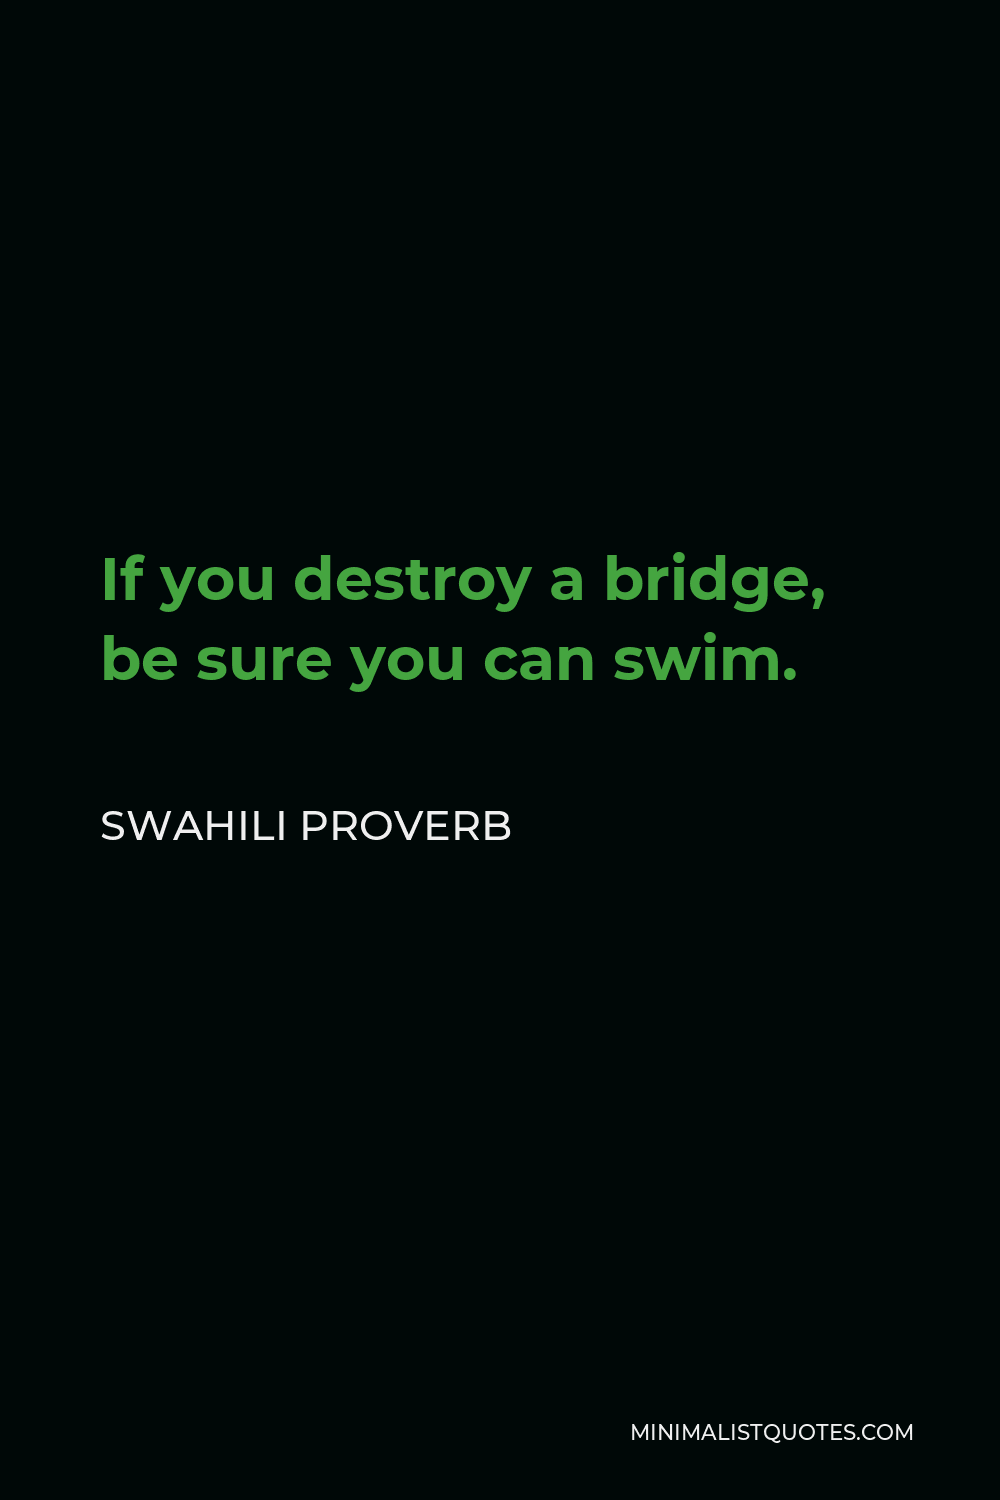 Swahili Proverb Quote - If you destroy a bridge, be sure you can swim.